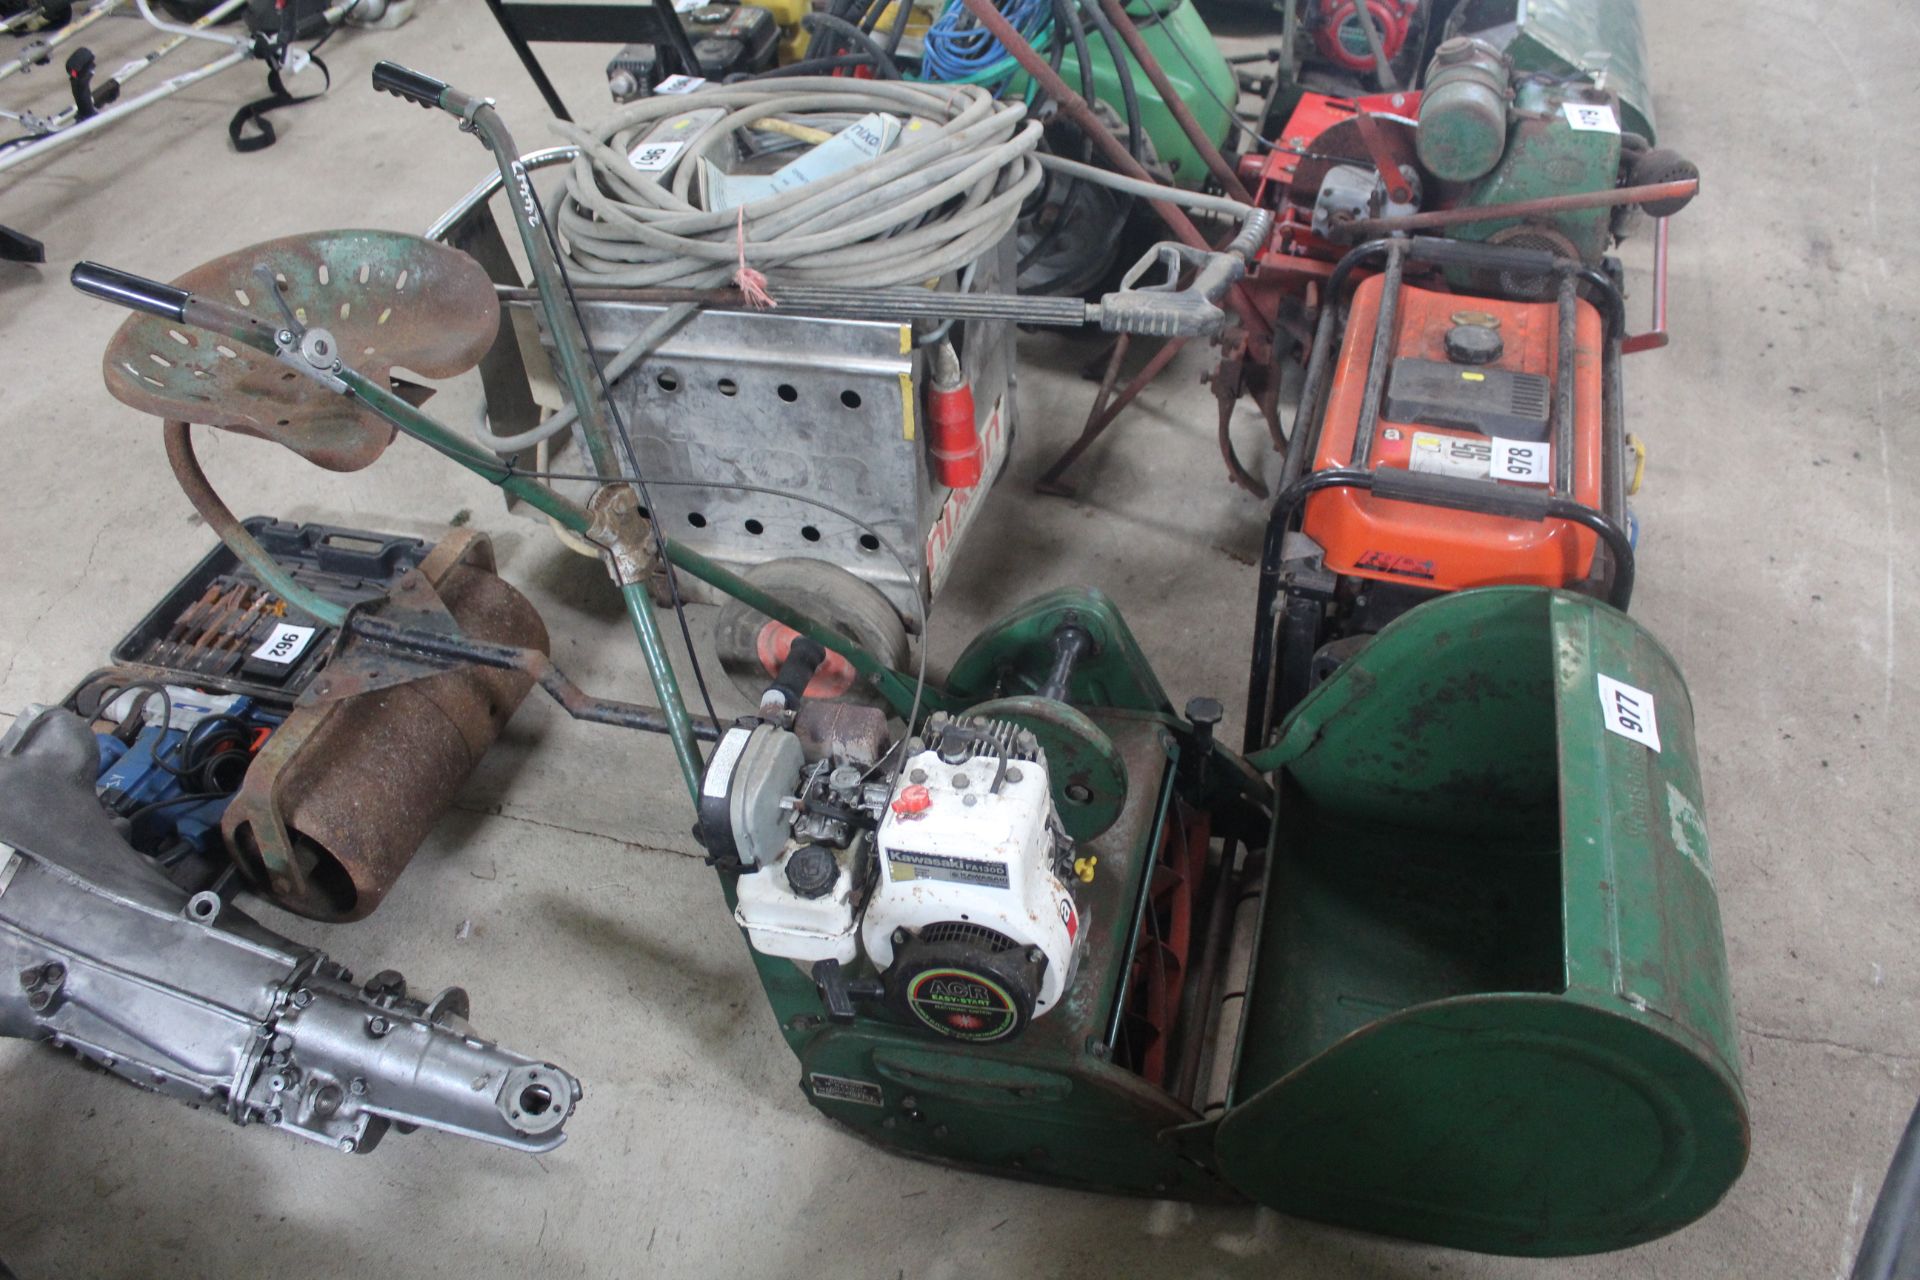 Ransomes mower, box and seat.